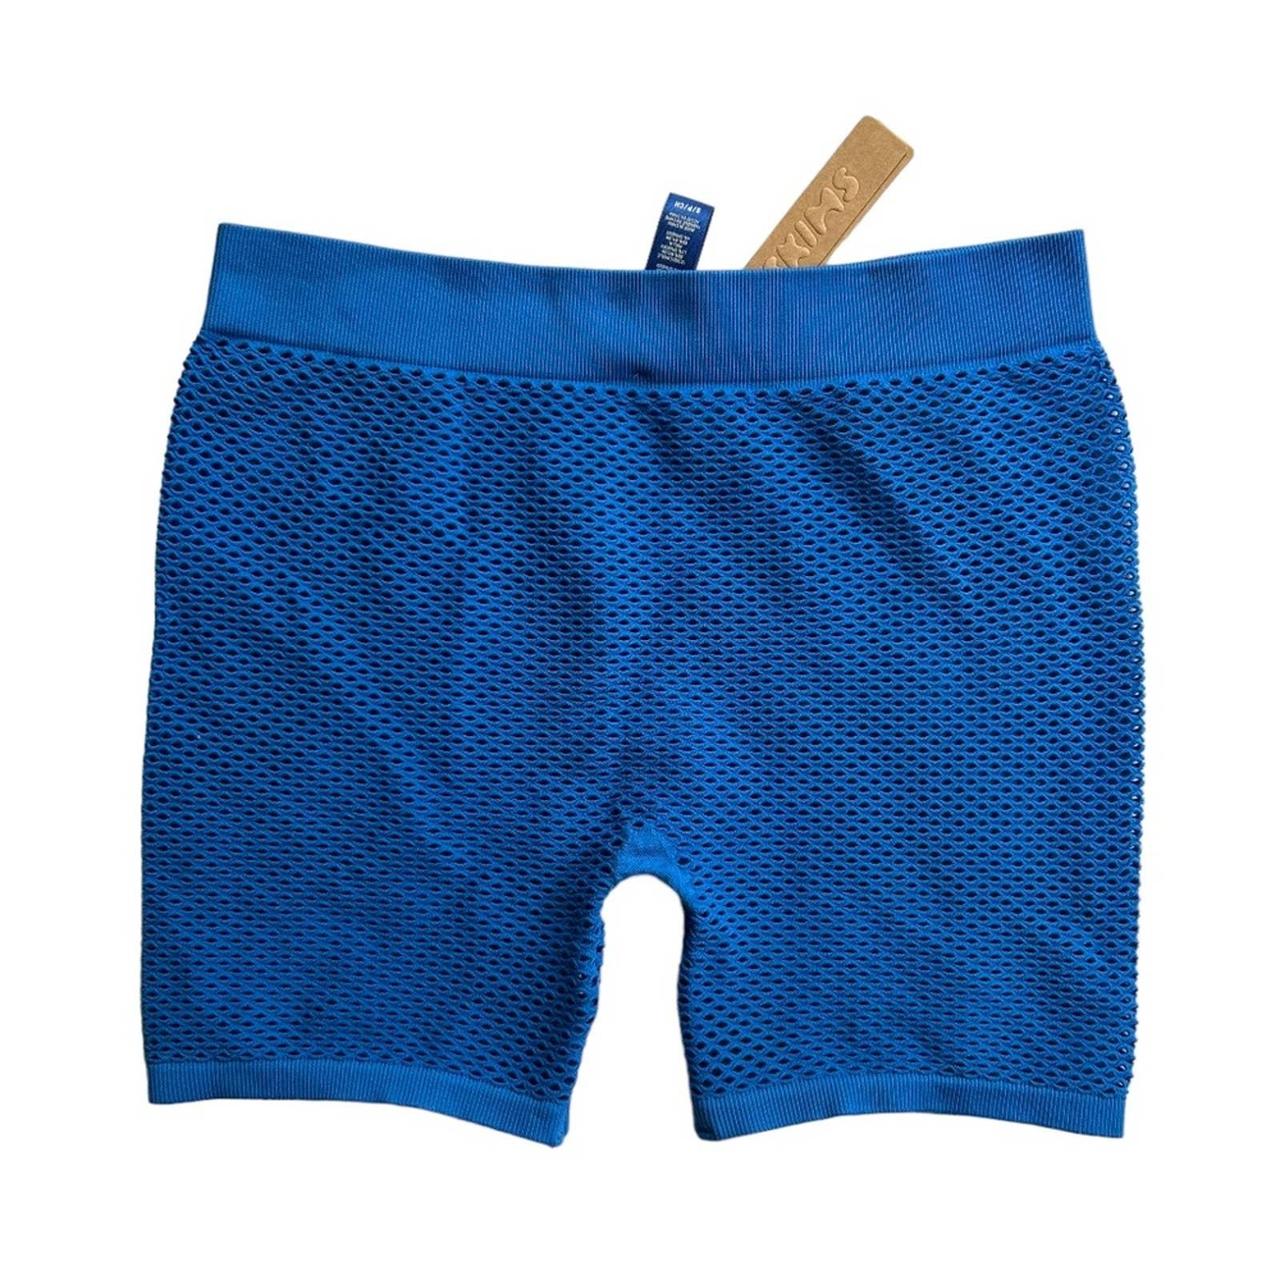 NWT SKIMS Perforated Seamless Short,, Color